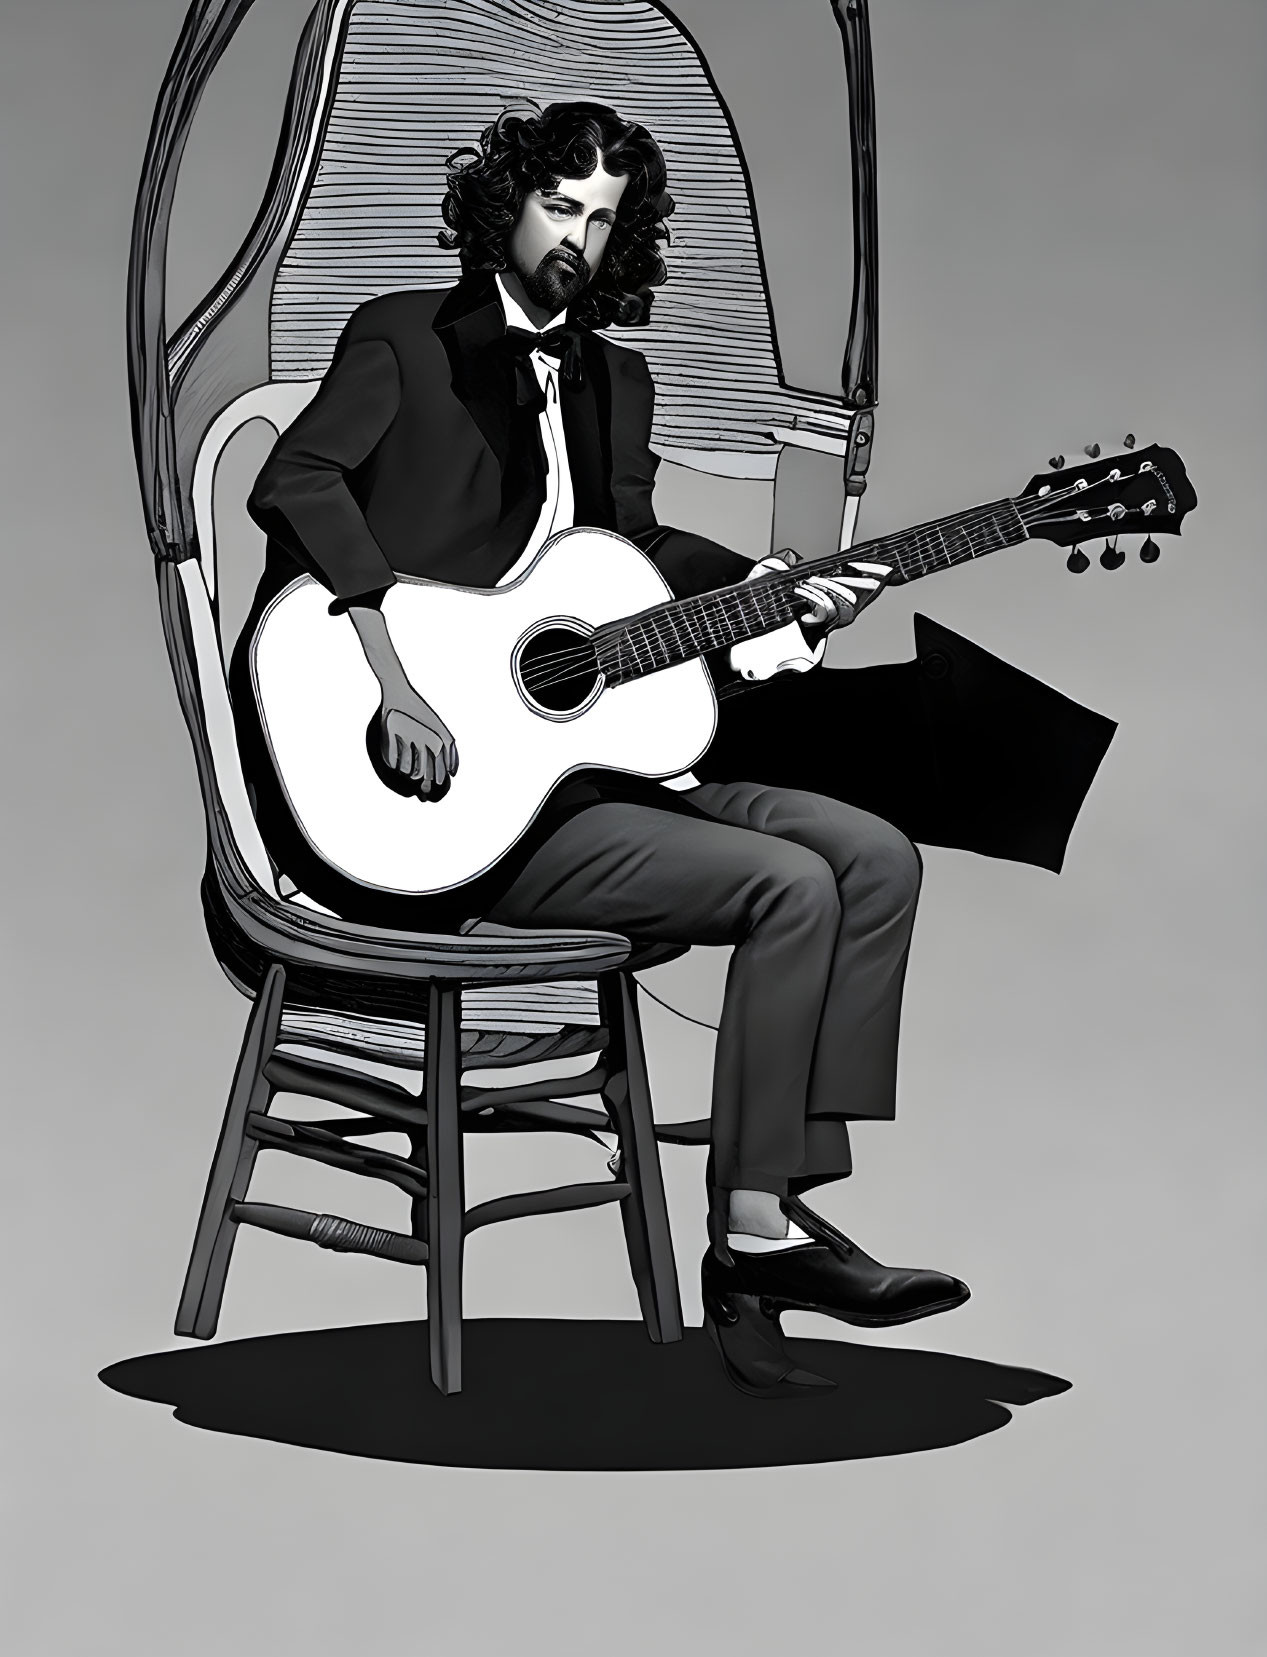 Monochrome illustration of man in suit playing guitar on unique chair